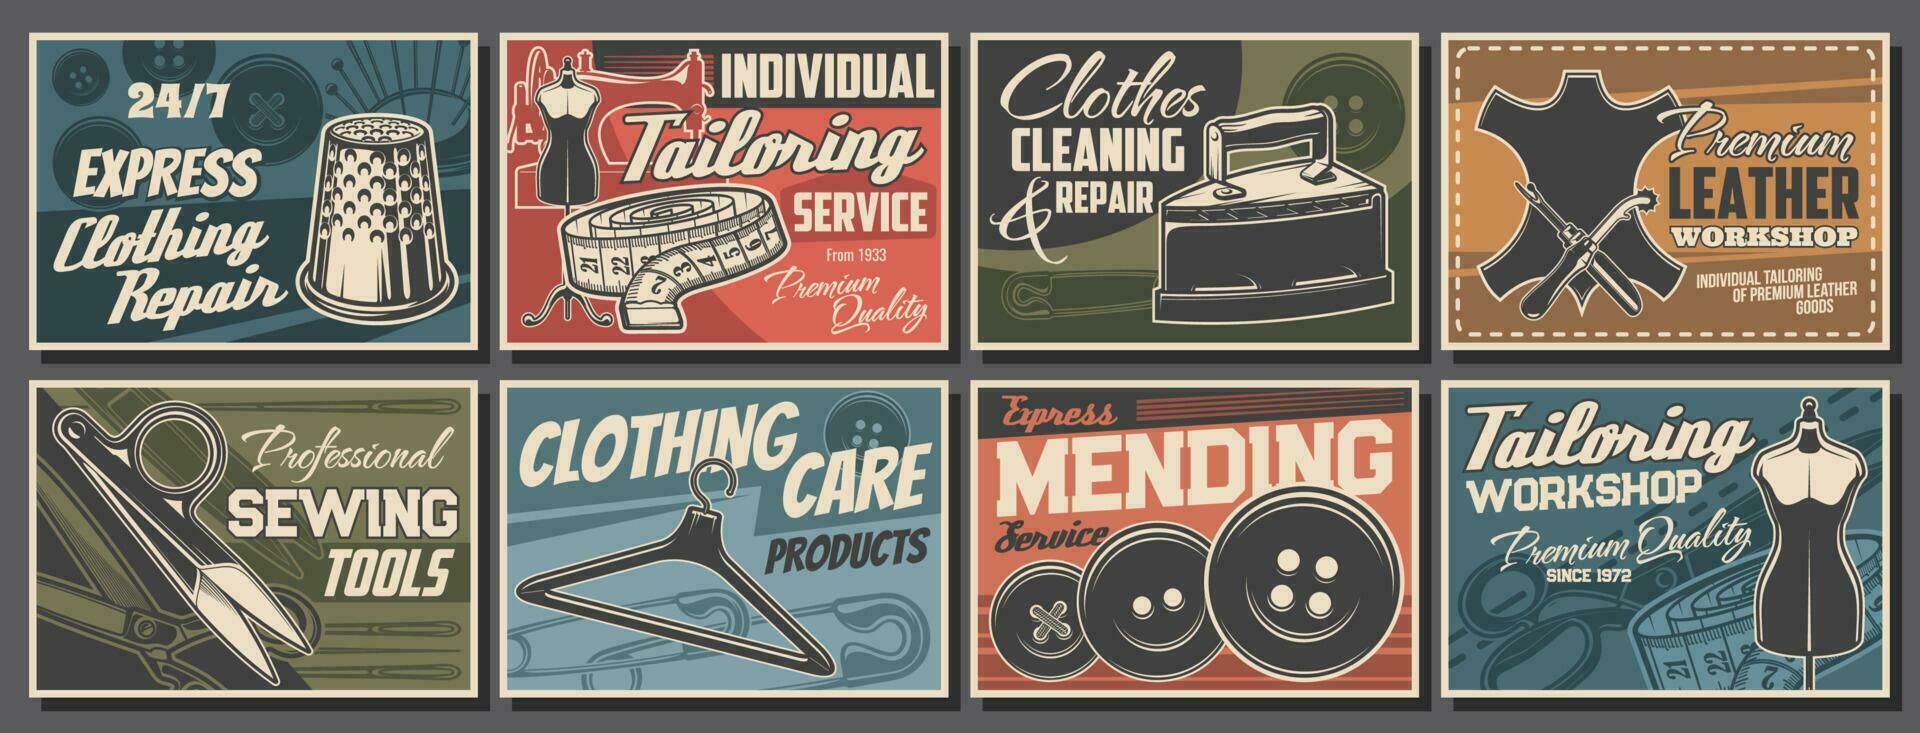 Tailoring service and sewing tools retro posters vector